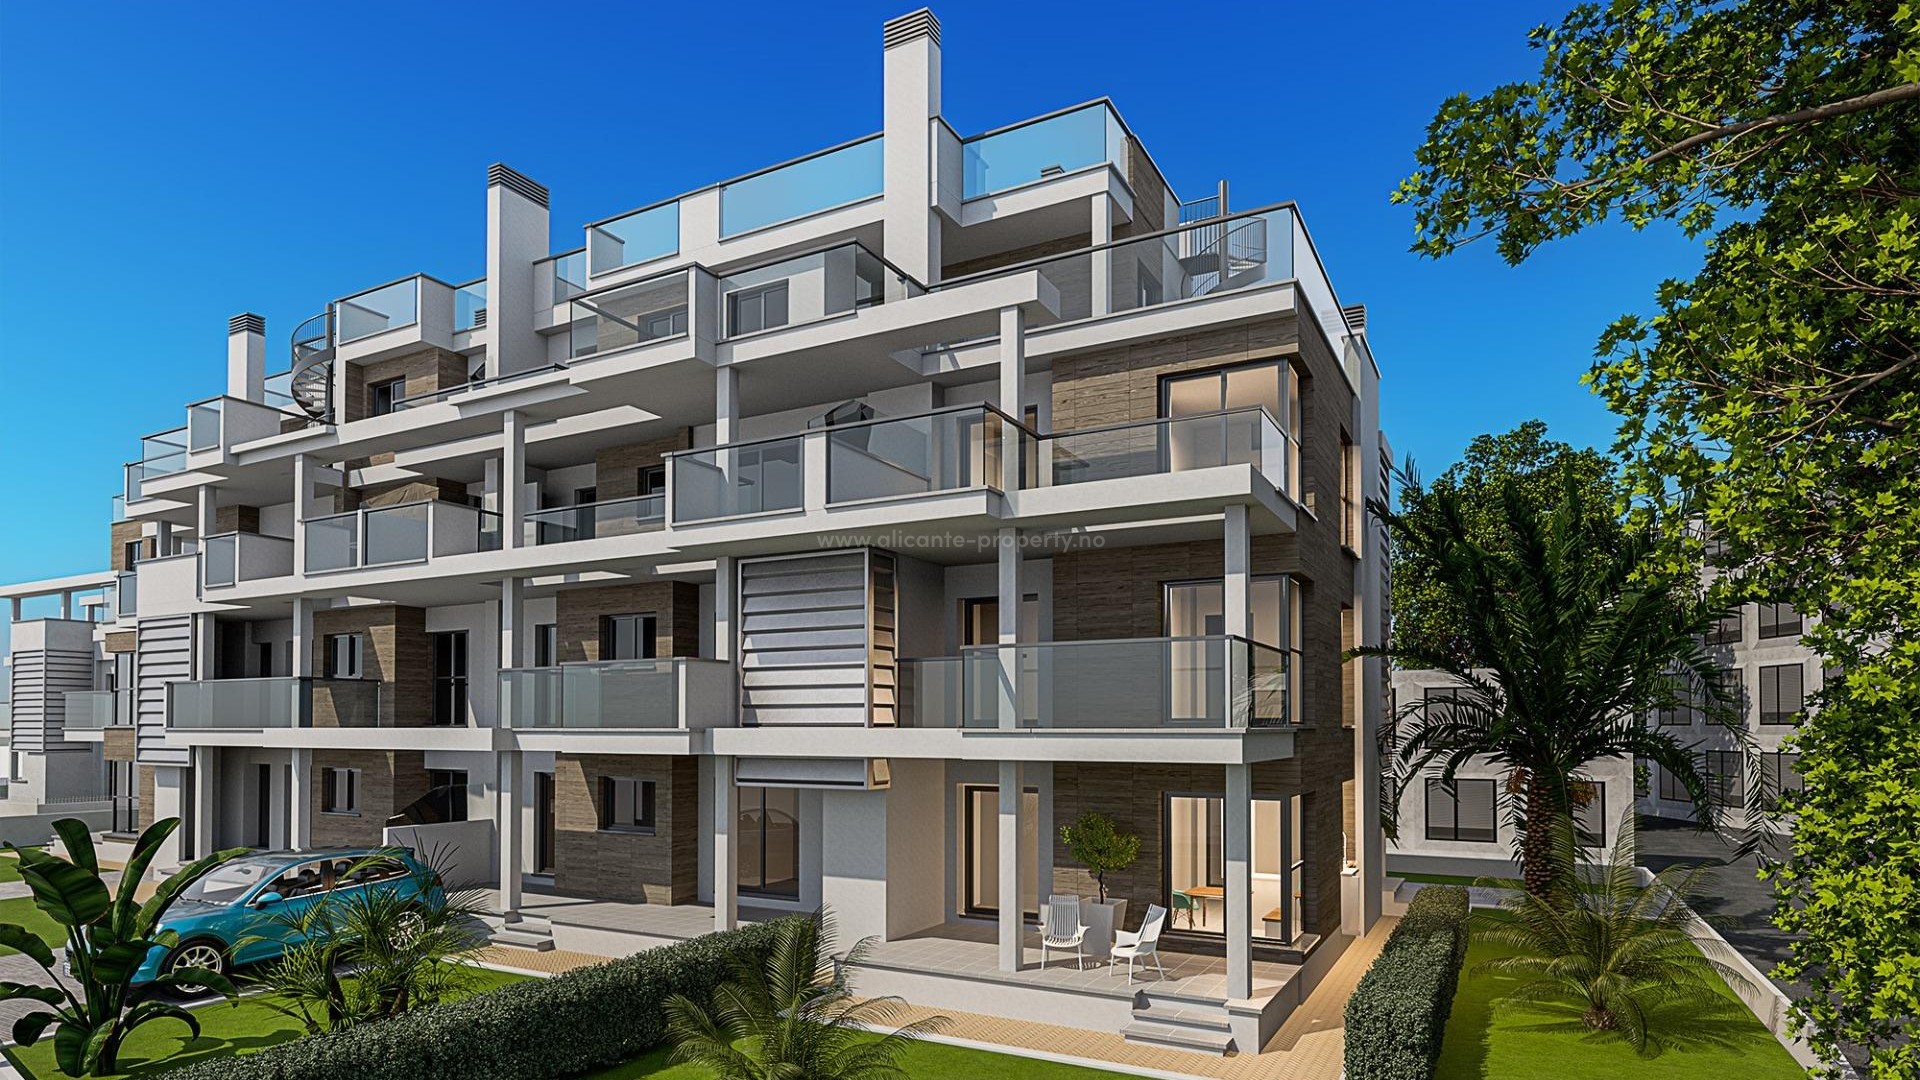 29 new apartments in Denia, 2/3 bedrooms, 2 bathrooms, shared pool, garden or solarium, parking, unbeatable location 100 meters from beaches, 2 km to the center